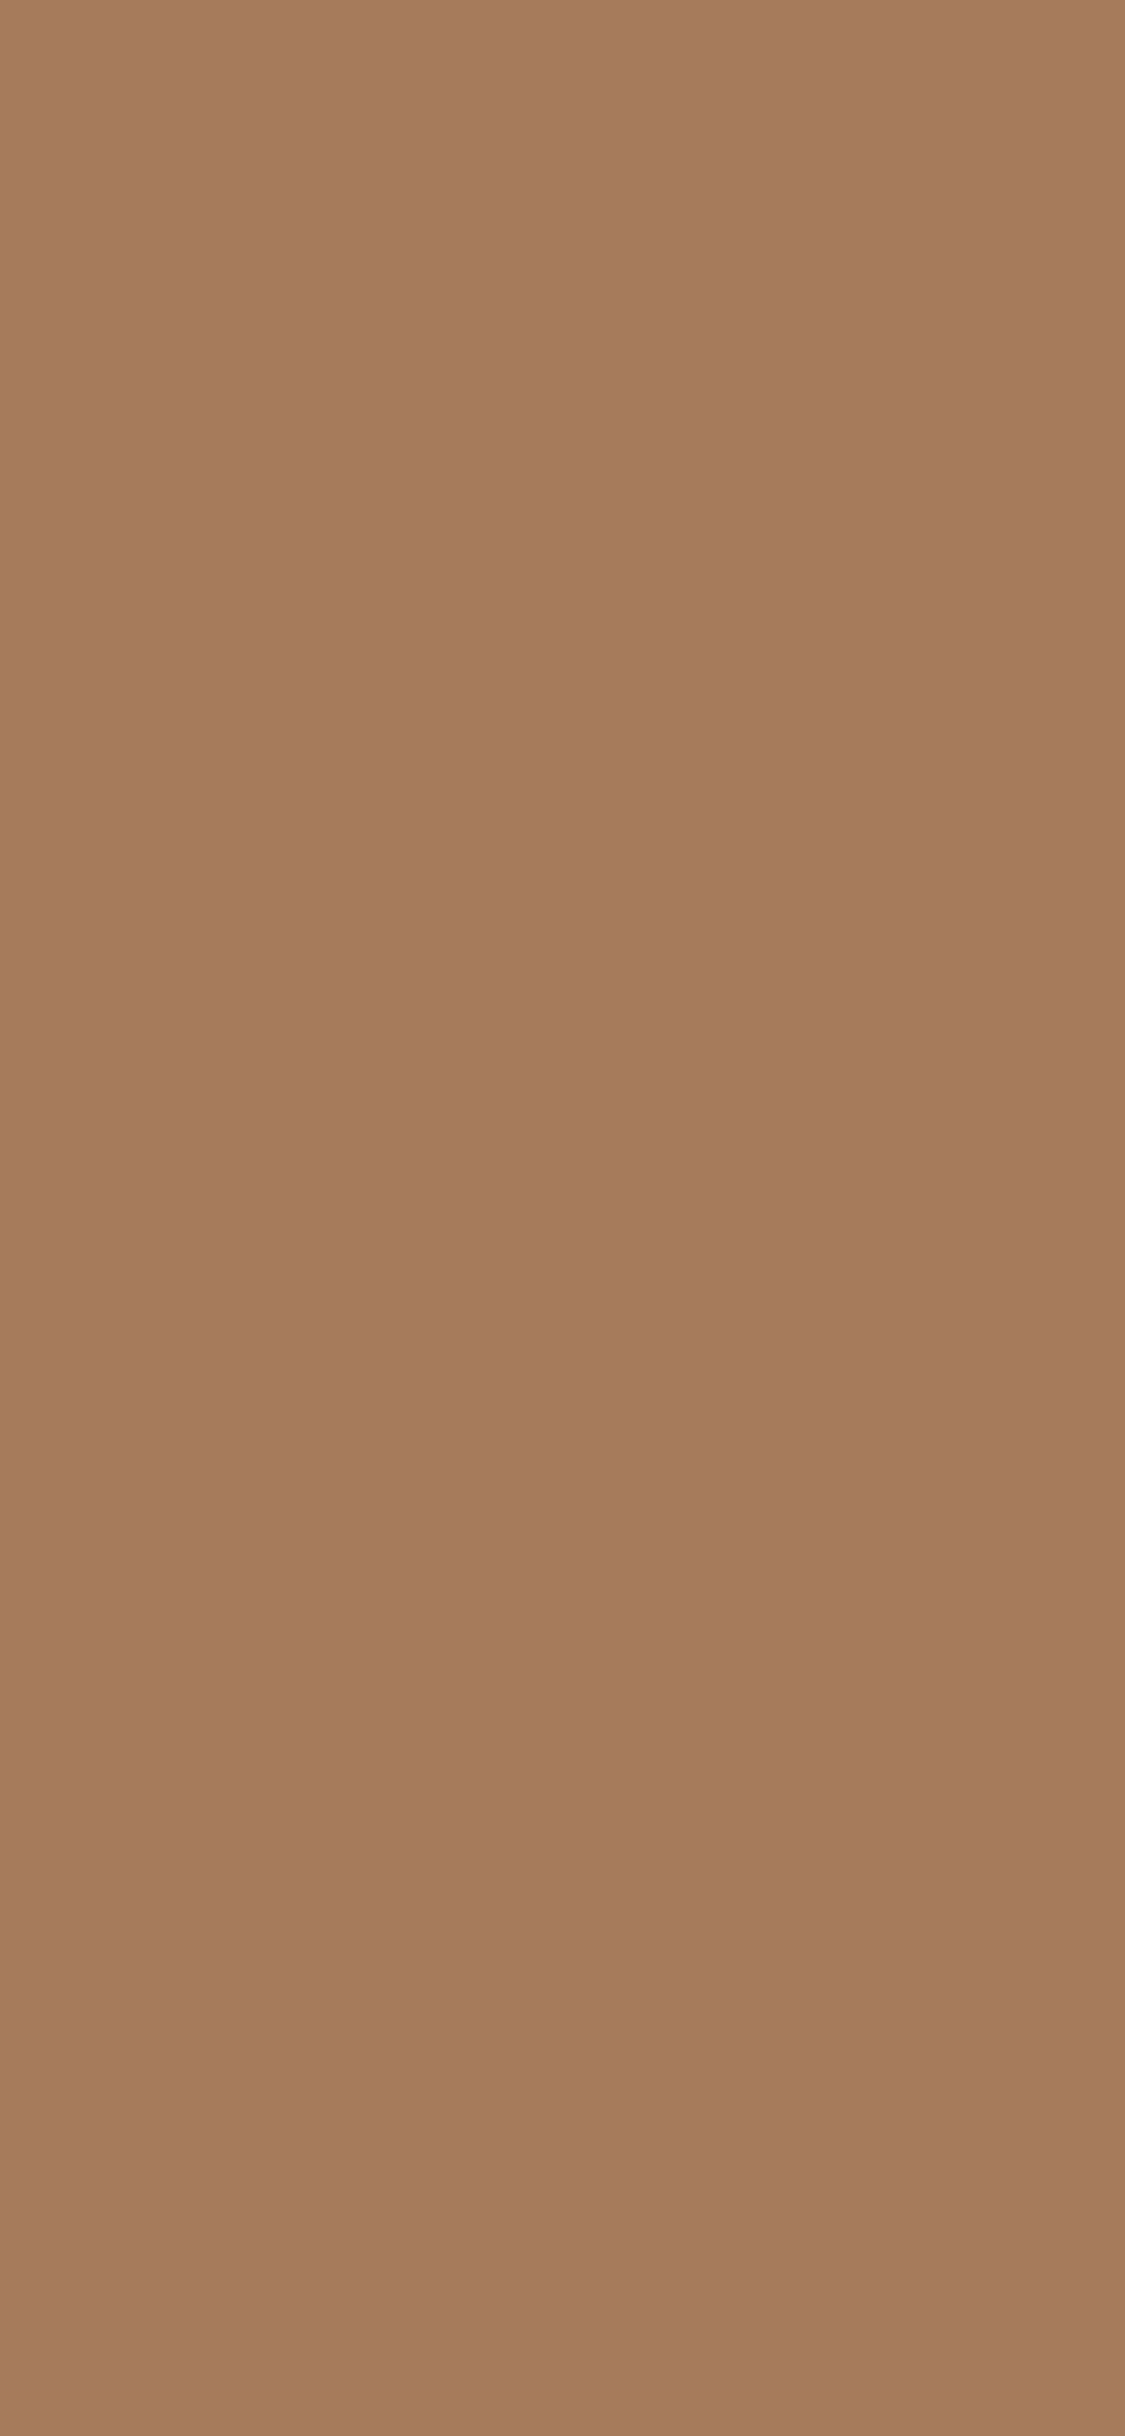 1125x2436 Tuscan Tan Solid Color Background